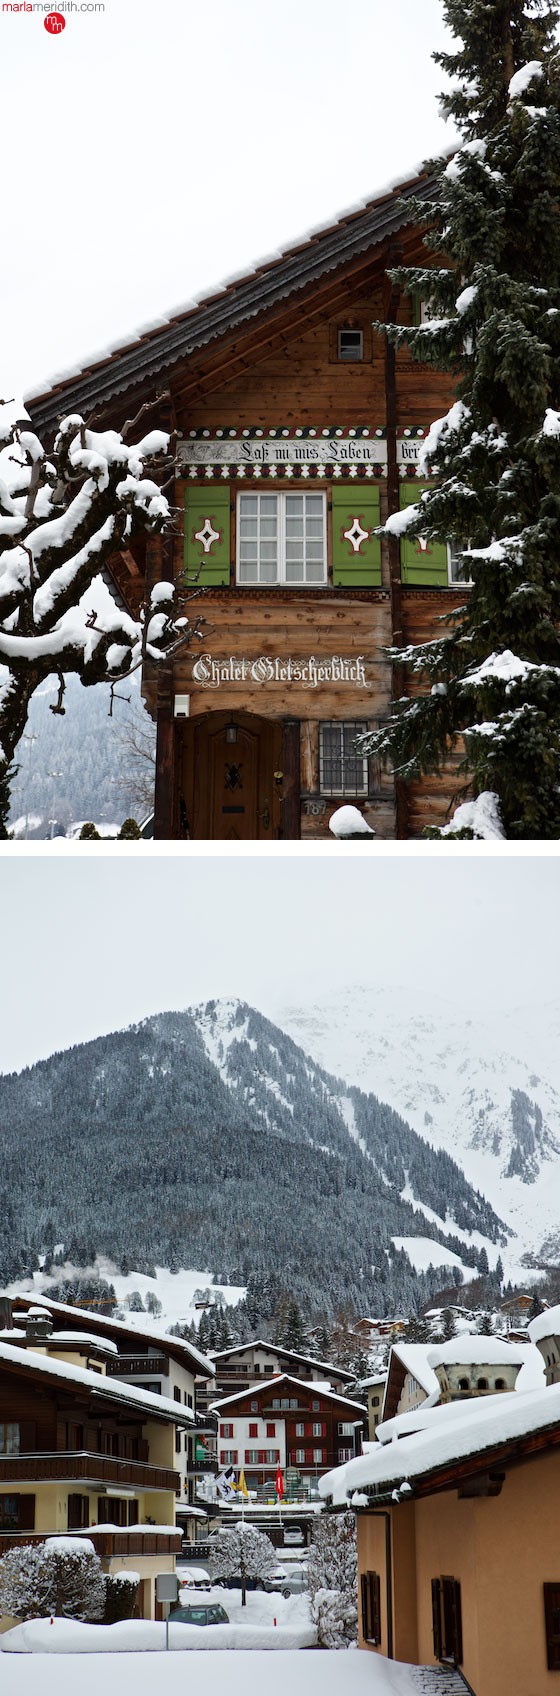 Davos & Klosters, Switzerland with Alpenglow Ski Safaris | An off-piste trip of a lifetime! MarlaMeridith.com